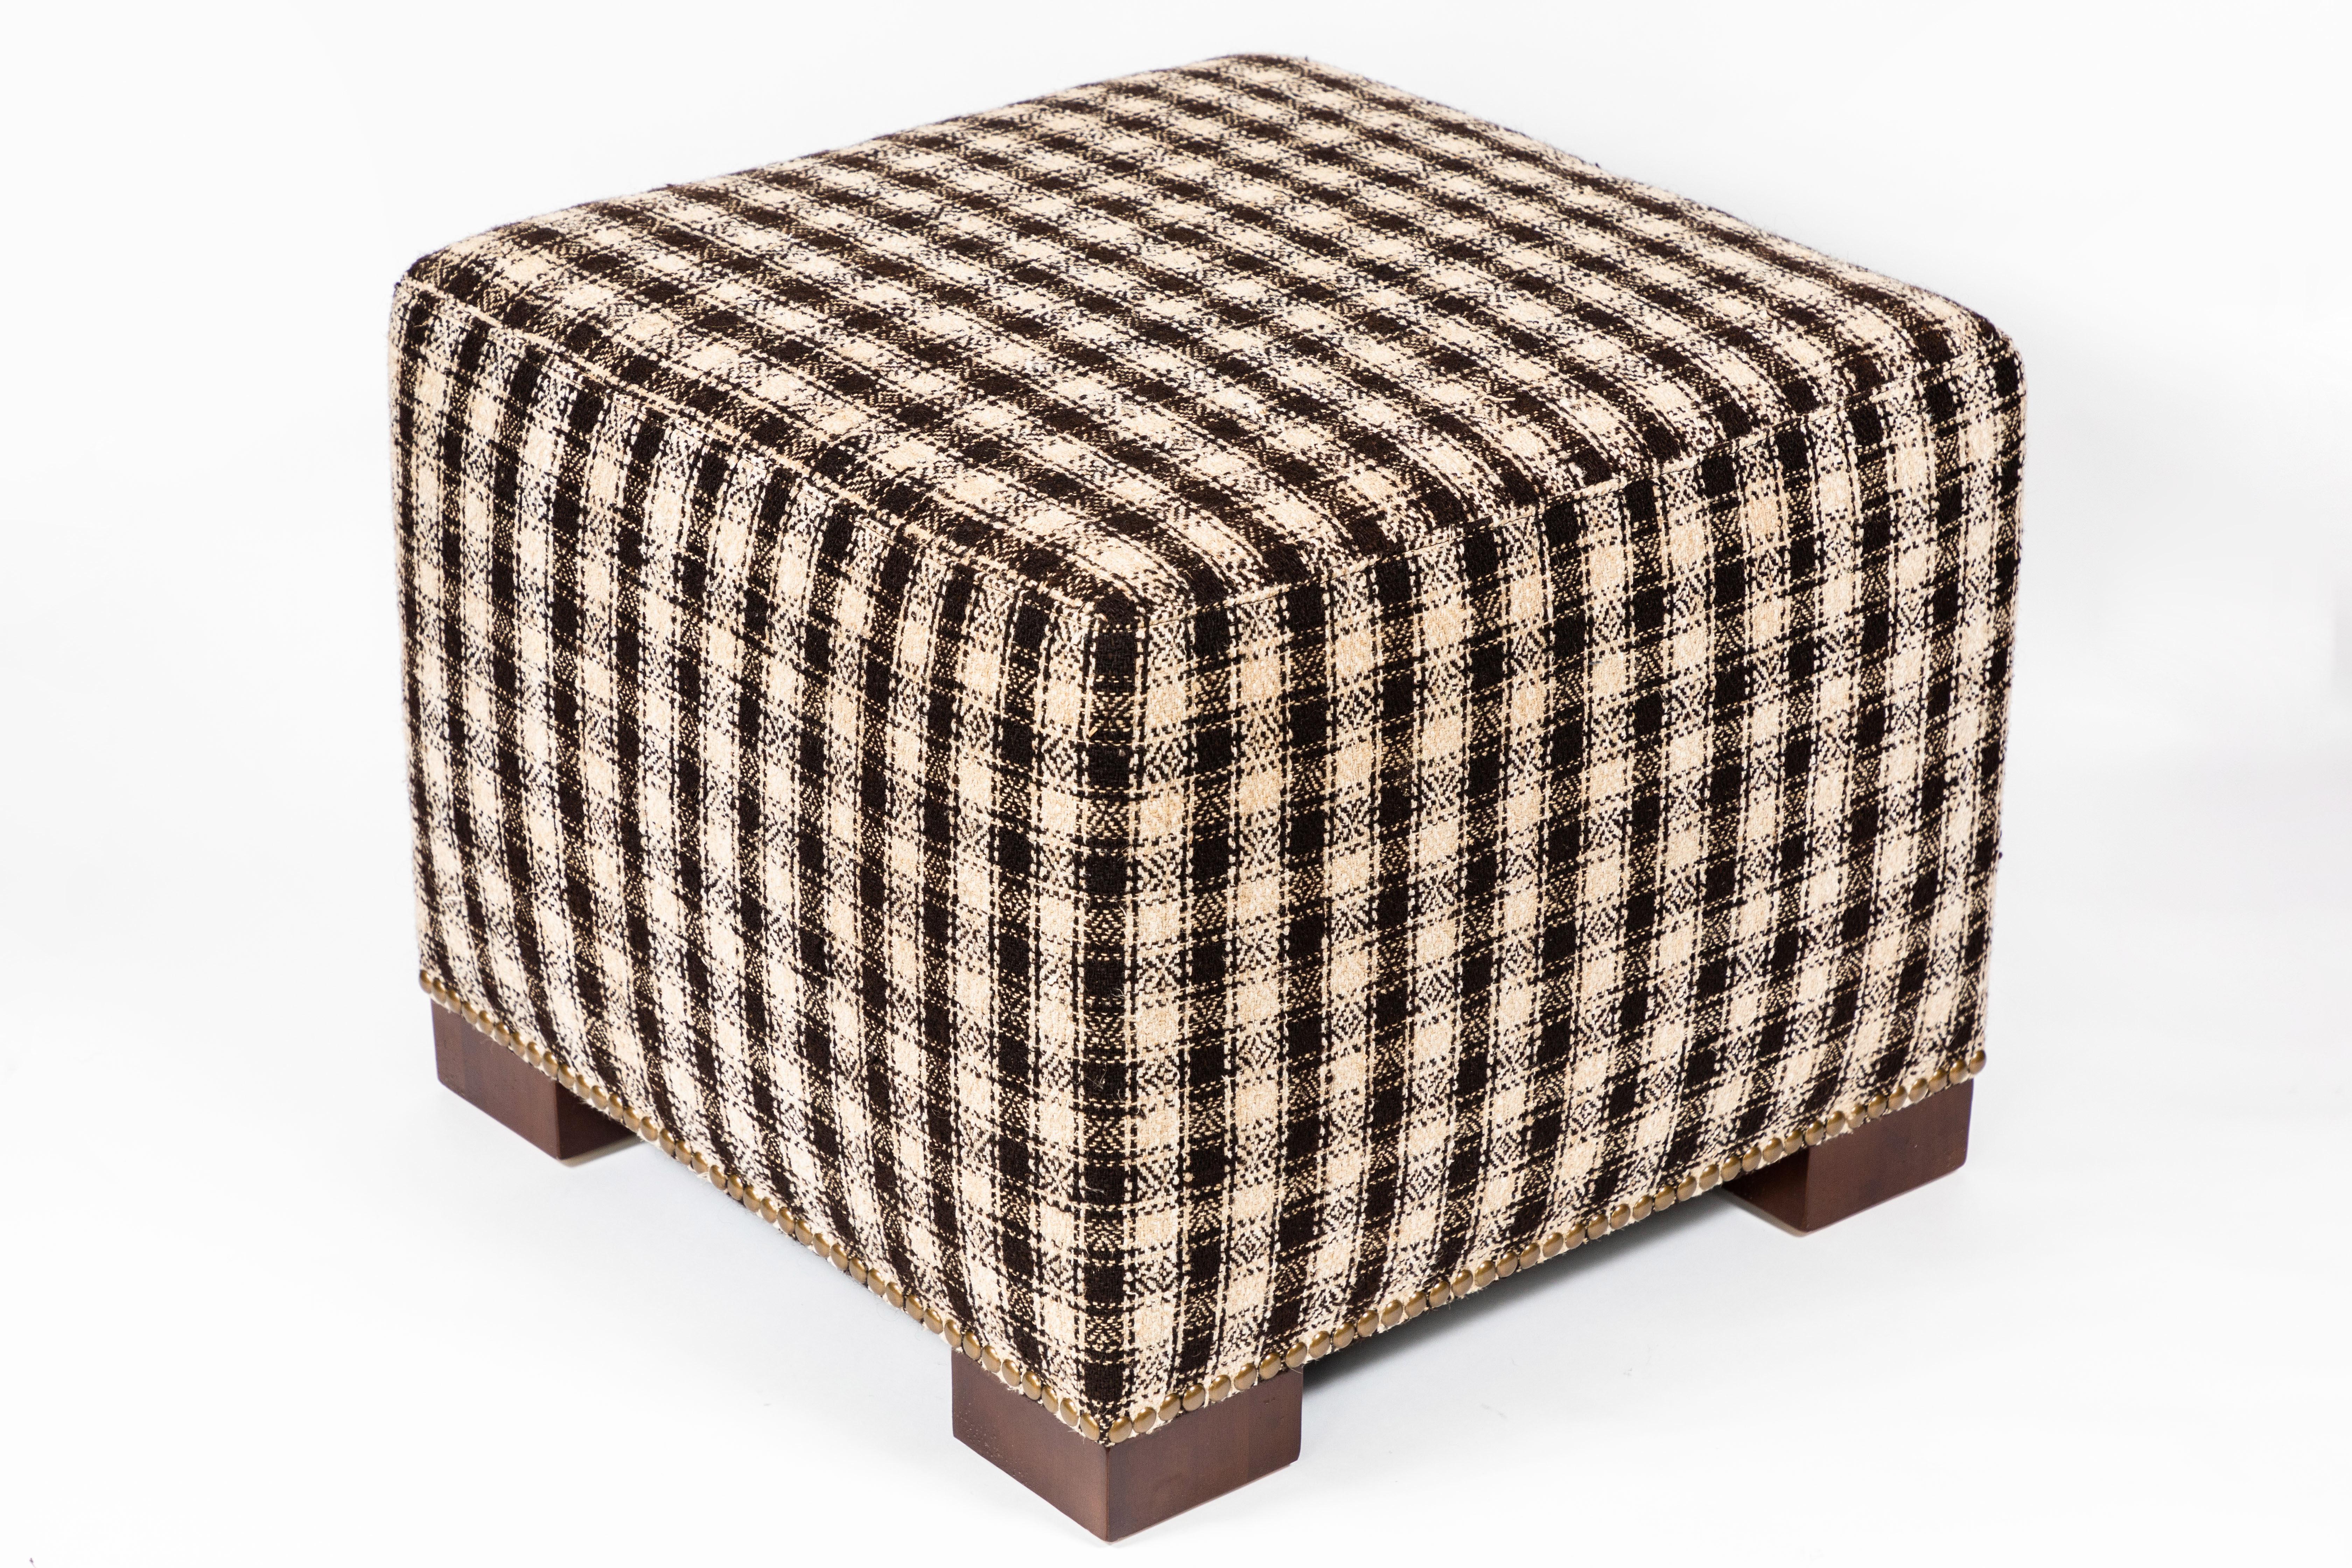 Textile Custom Made Ottoman Upholstered with a Vintage Wool and Hemp Wagon Blanket